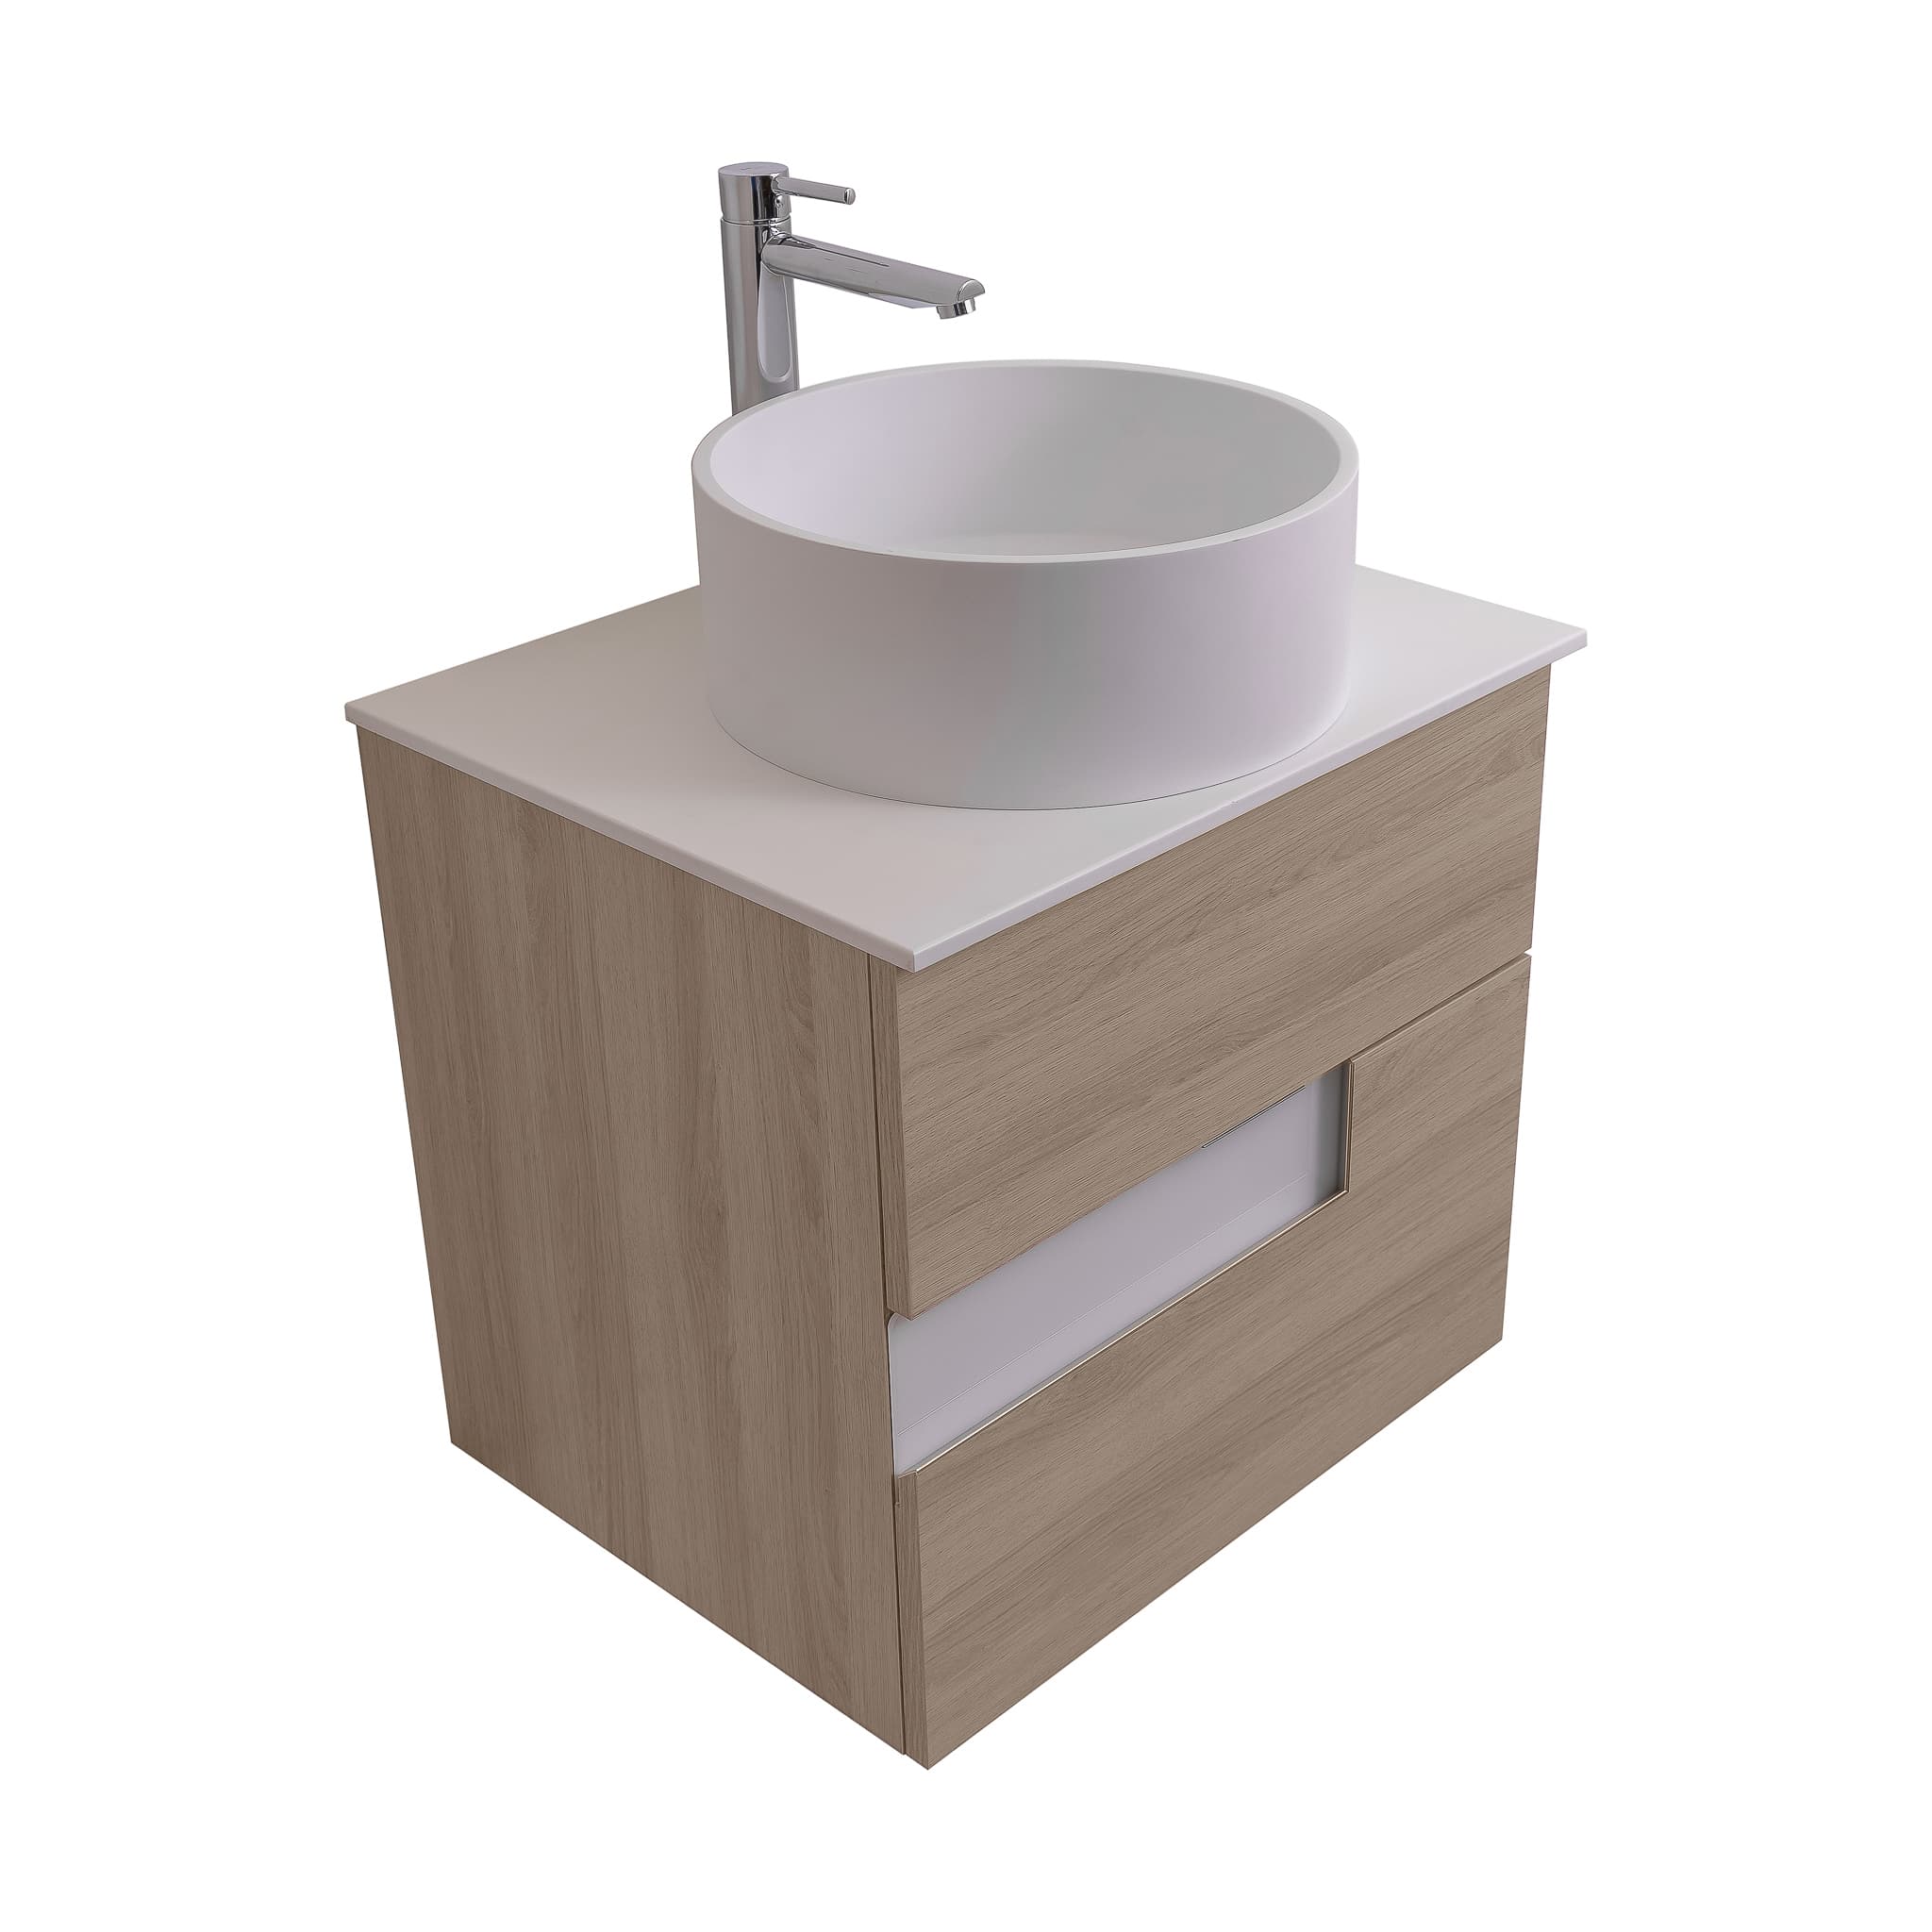 Vision 23.5 Natural Light Wood Cabinet, Solid Surface Flat White Counter And Round Solid Surface White Basin 1386, Wall Mounted Modern Vanity Set